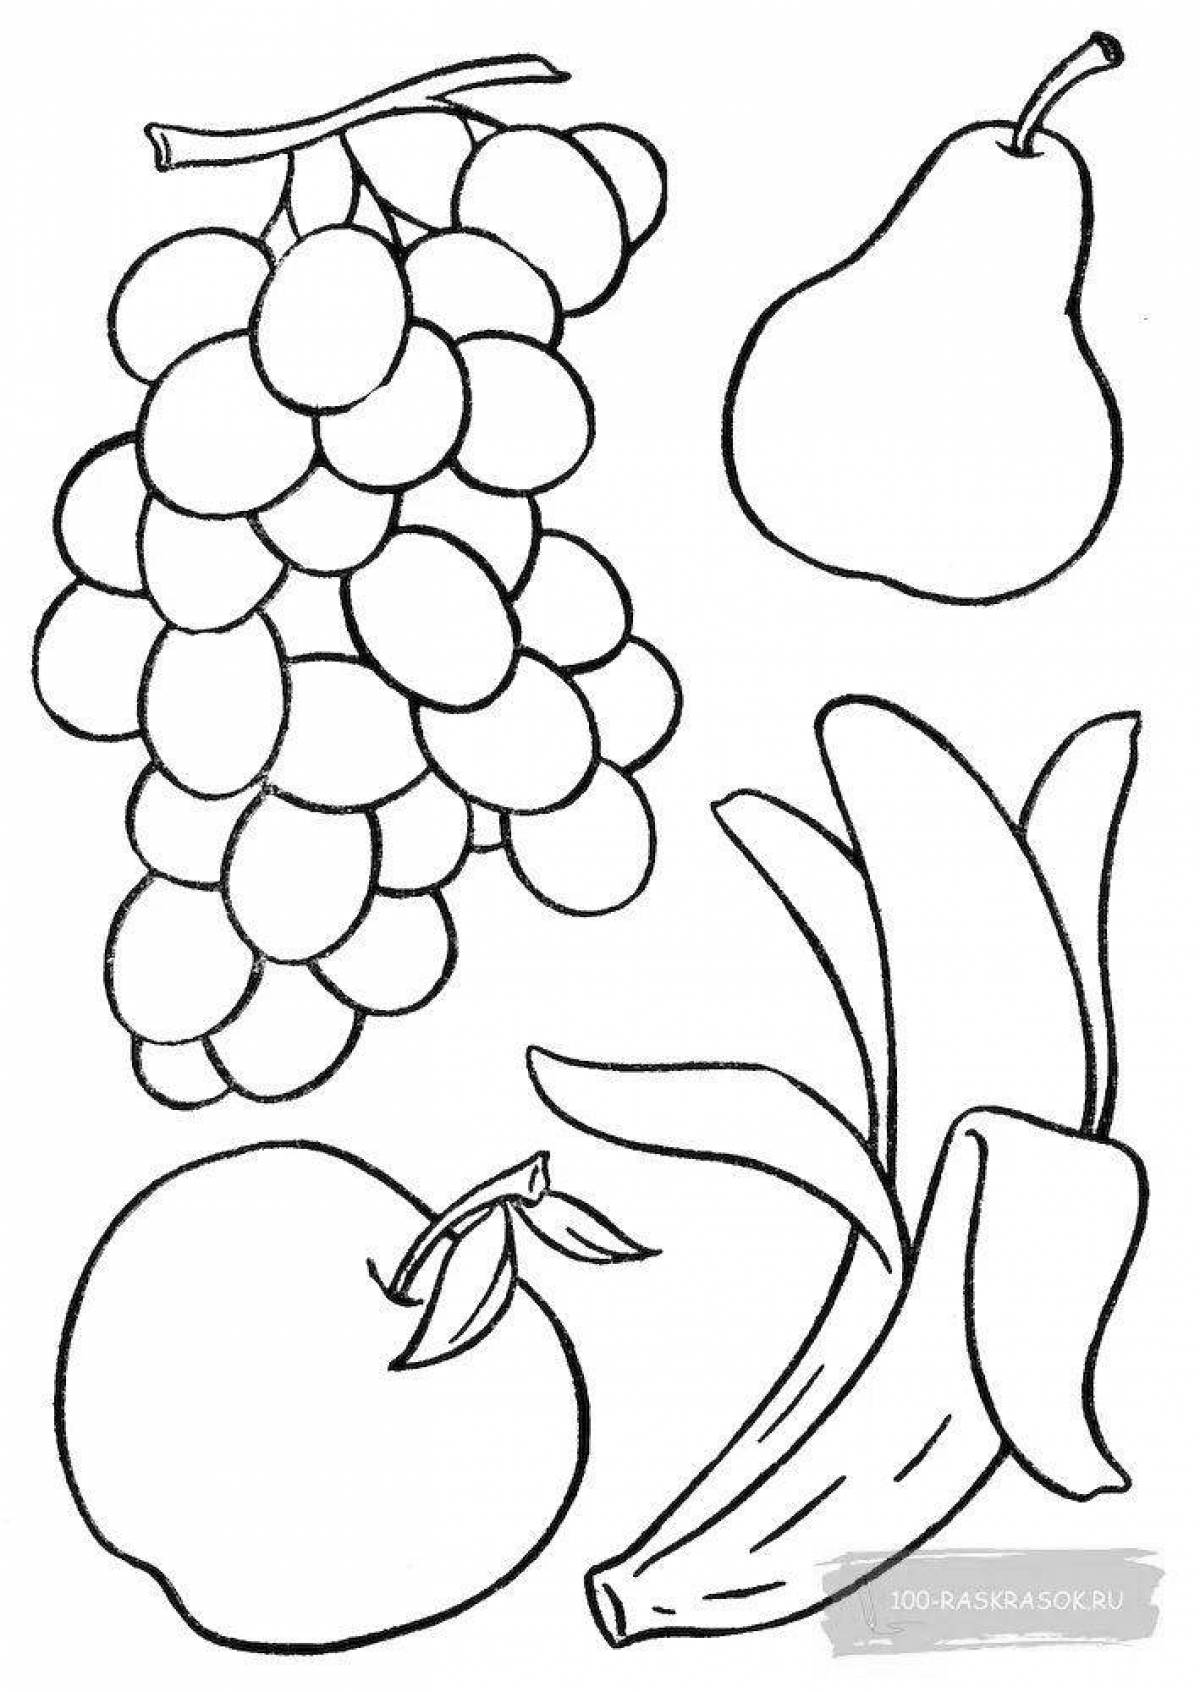 Fun coloring pages with fruits for children 2-3 years old